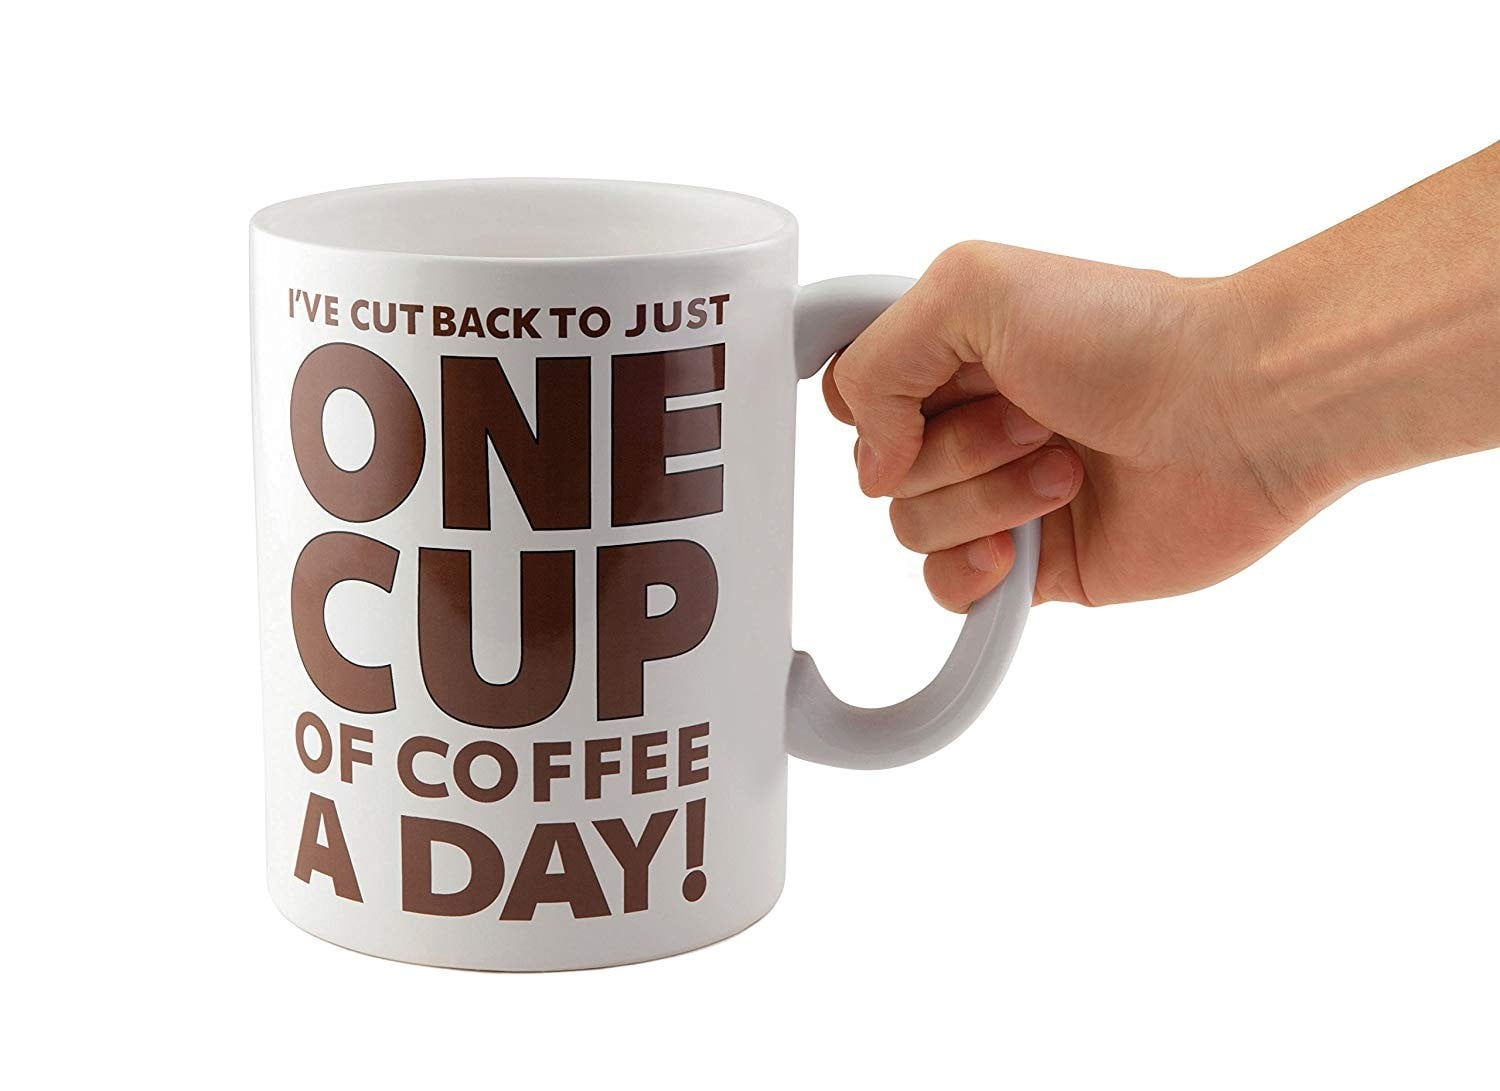 Big Giant Coffee Cup Mug by Allures & Illusions 